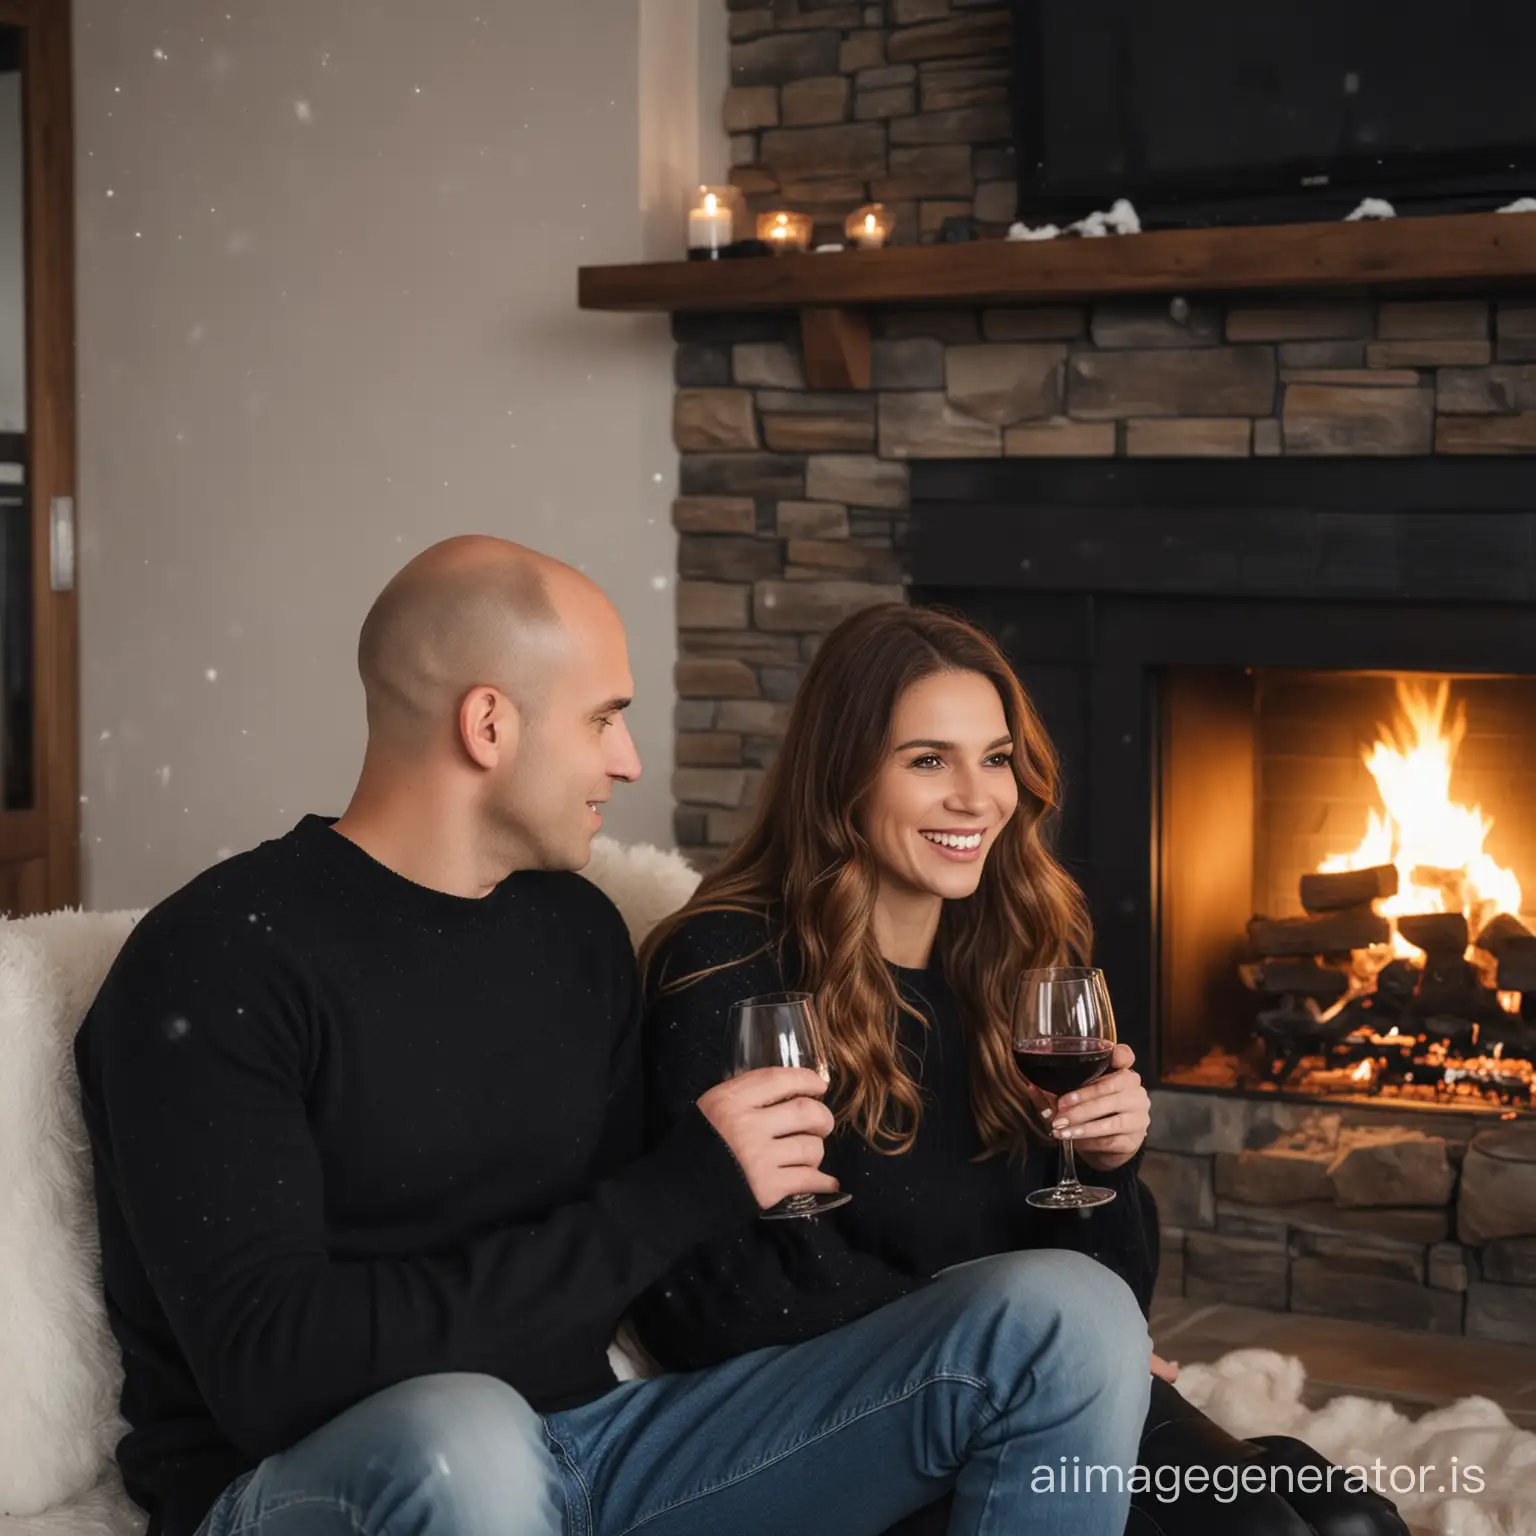 a bald man and a wavy brown long haired woman are sitting in front of a fireplace. there is snow outside. they drink wine. black sweater